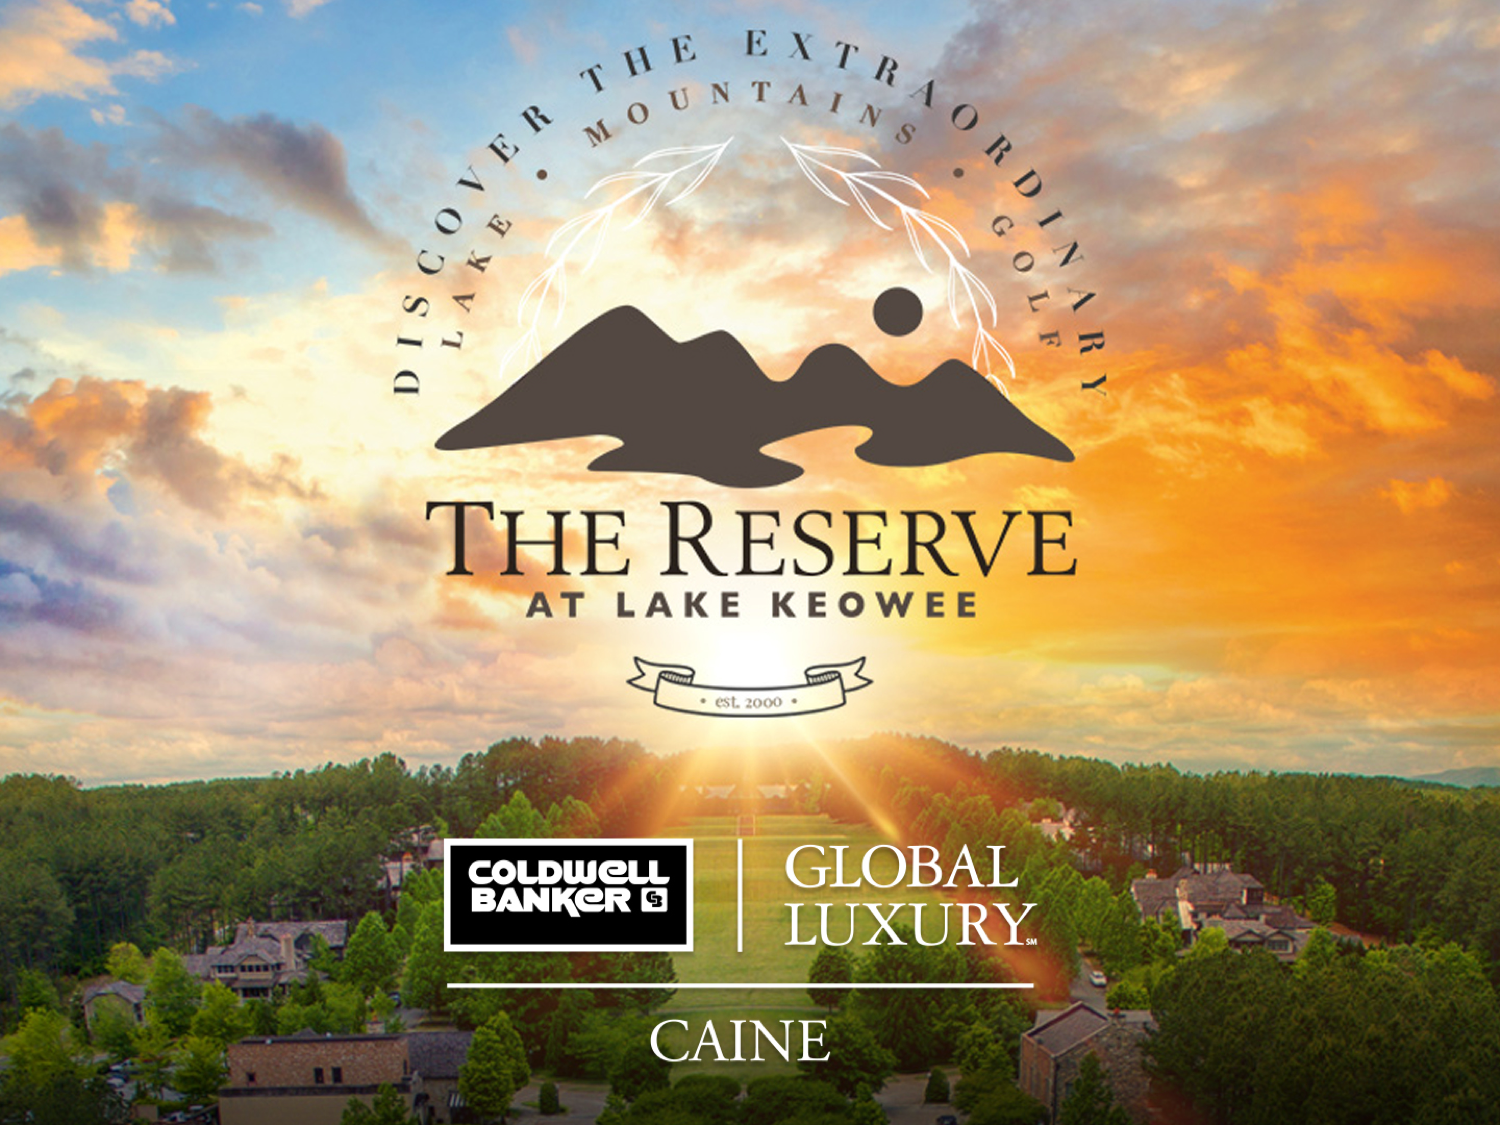 Coldwell Banker Caine Announces Strategic Sales and Marketing Partnership with The Reserve at Lake Keowee